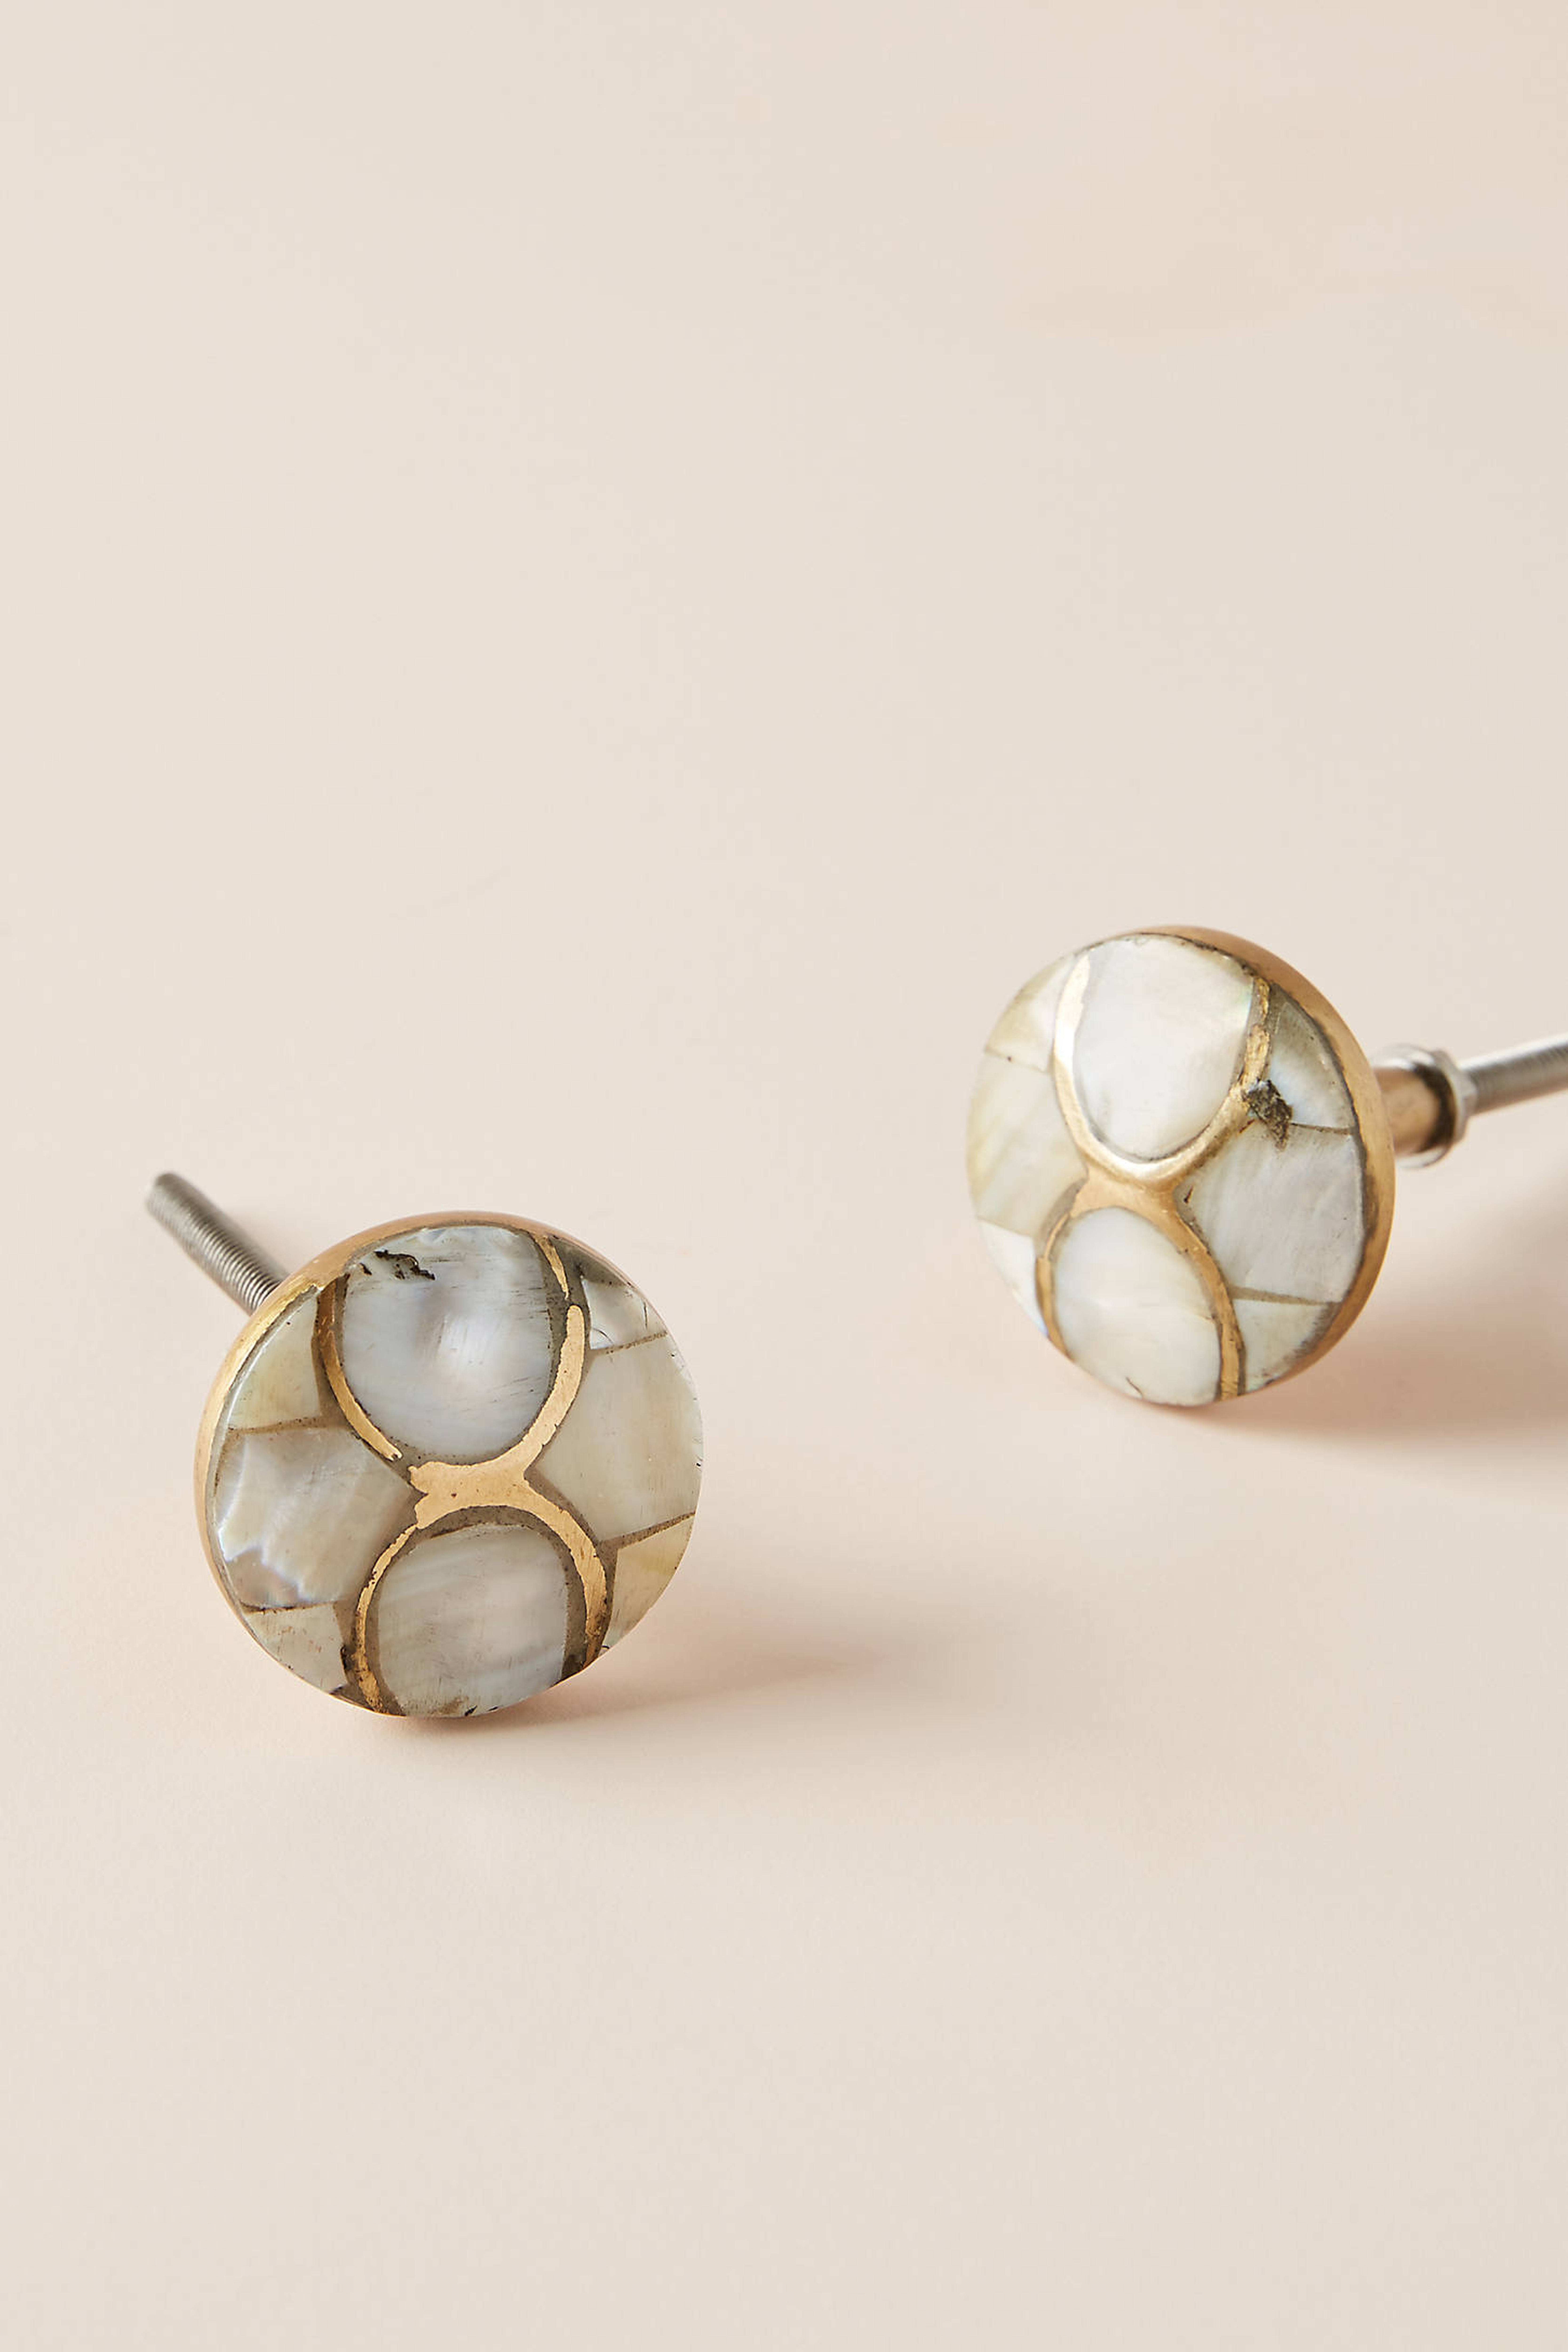 Pearlescent Infinity Knobs, Set of 2 - Anthropologie